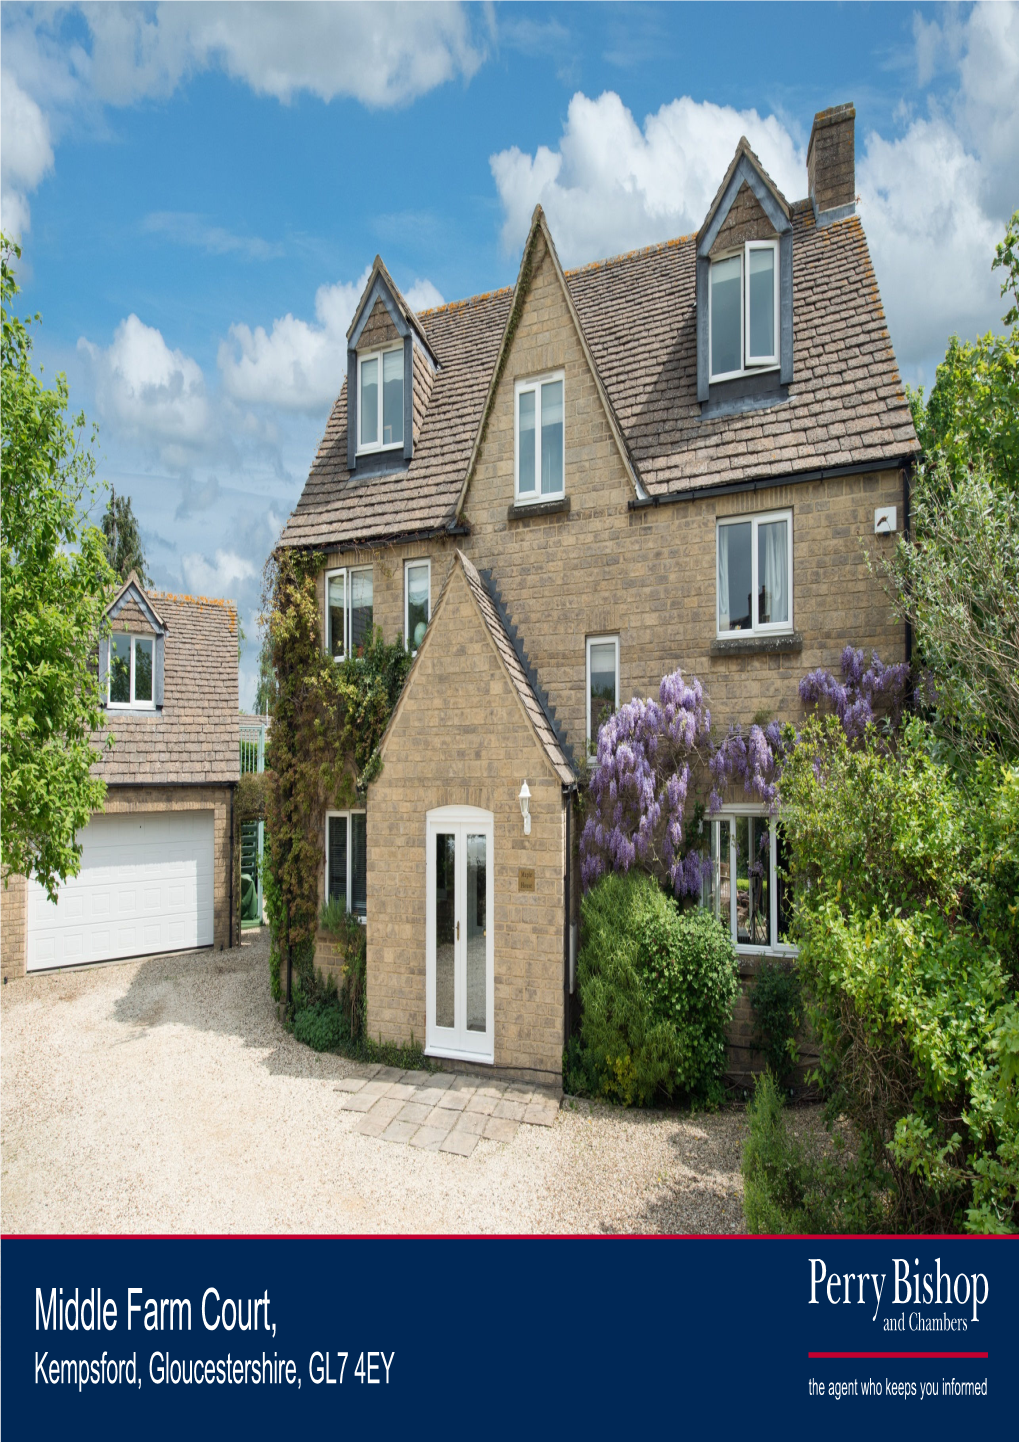 Middle Farm Court, Kempsford, Gloucestershire, GL7 4EY